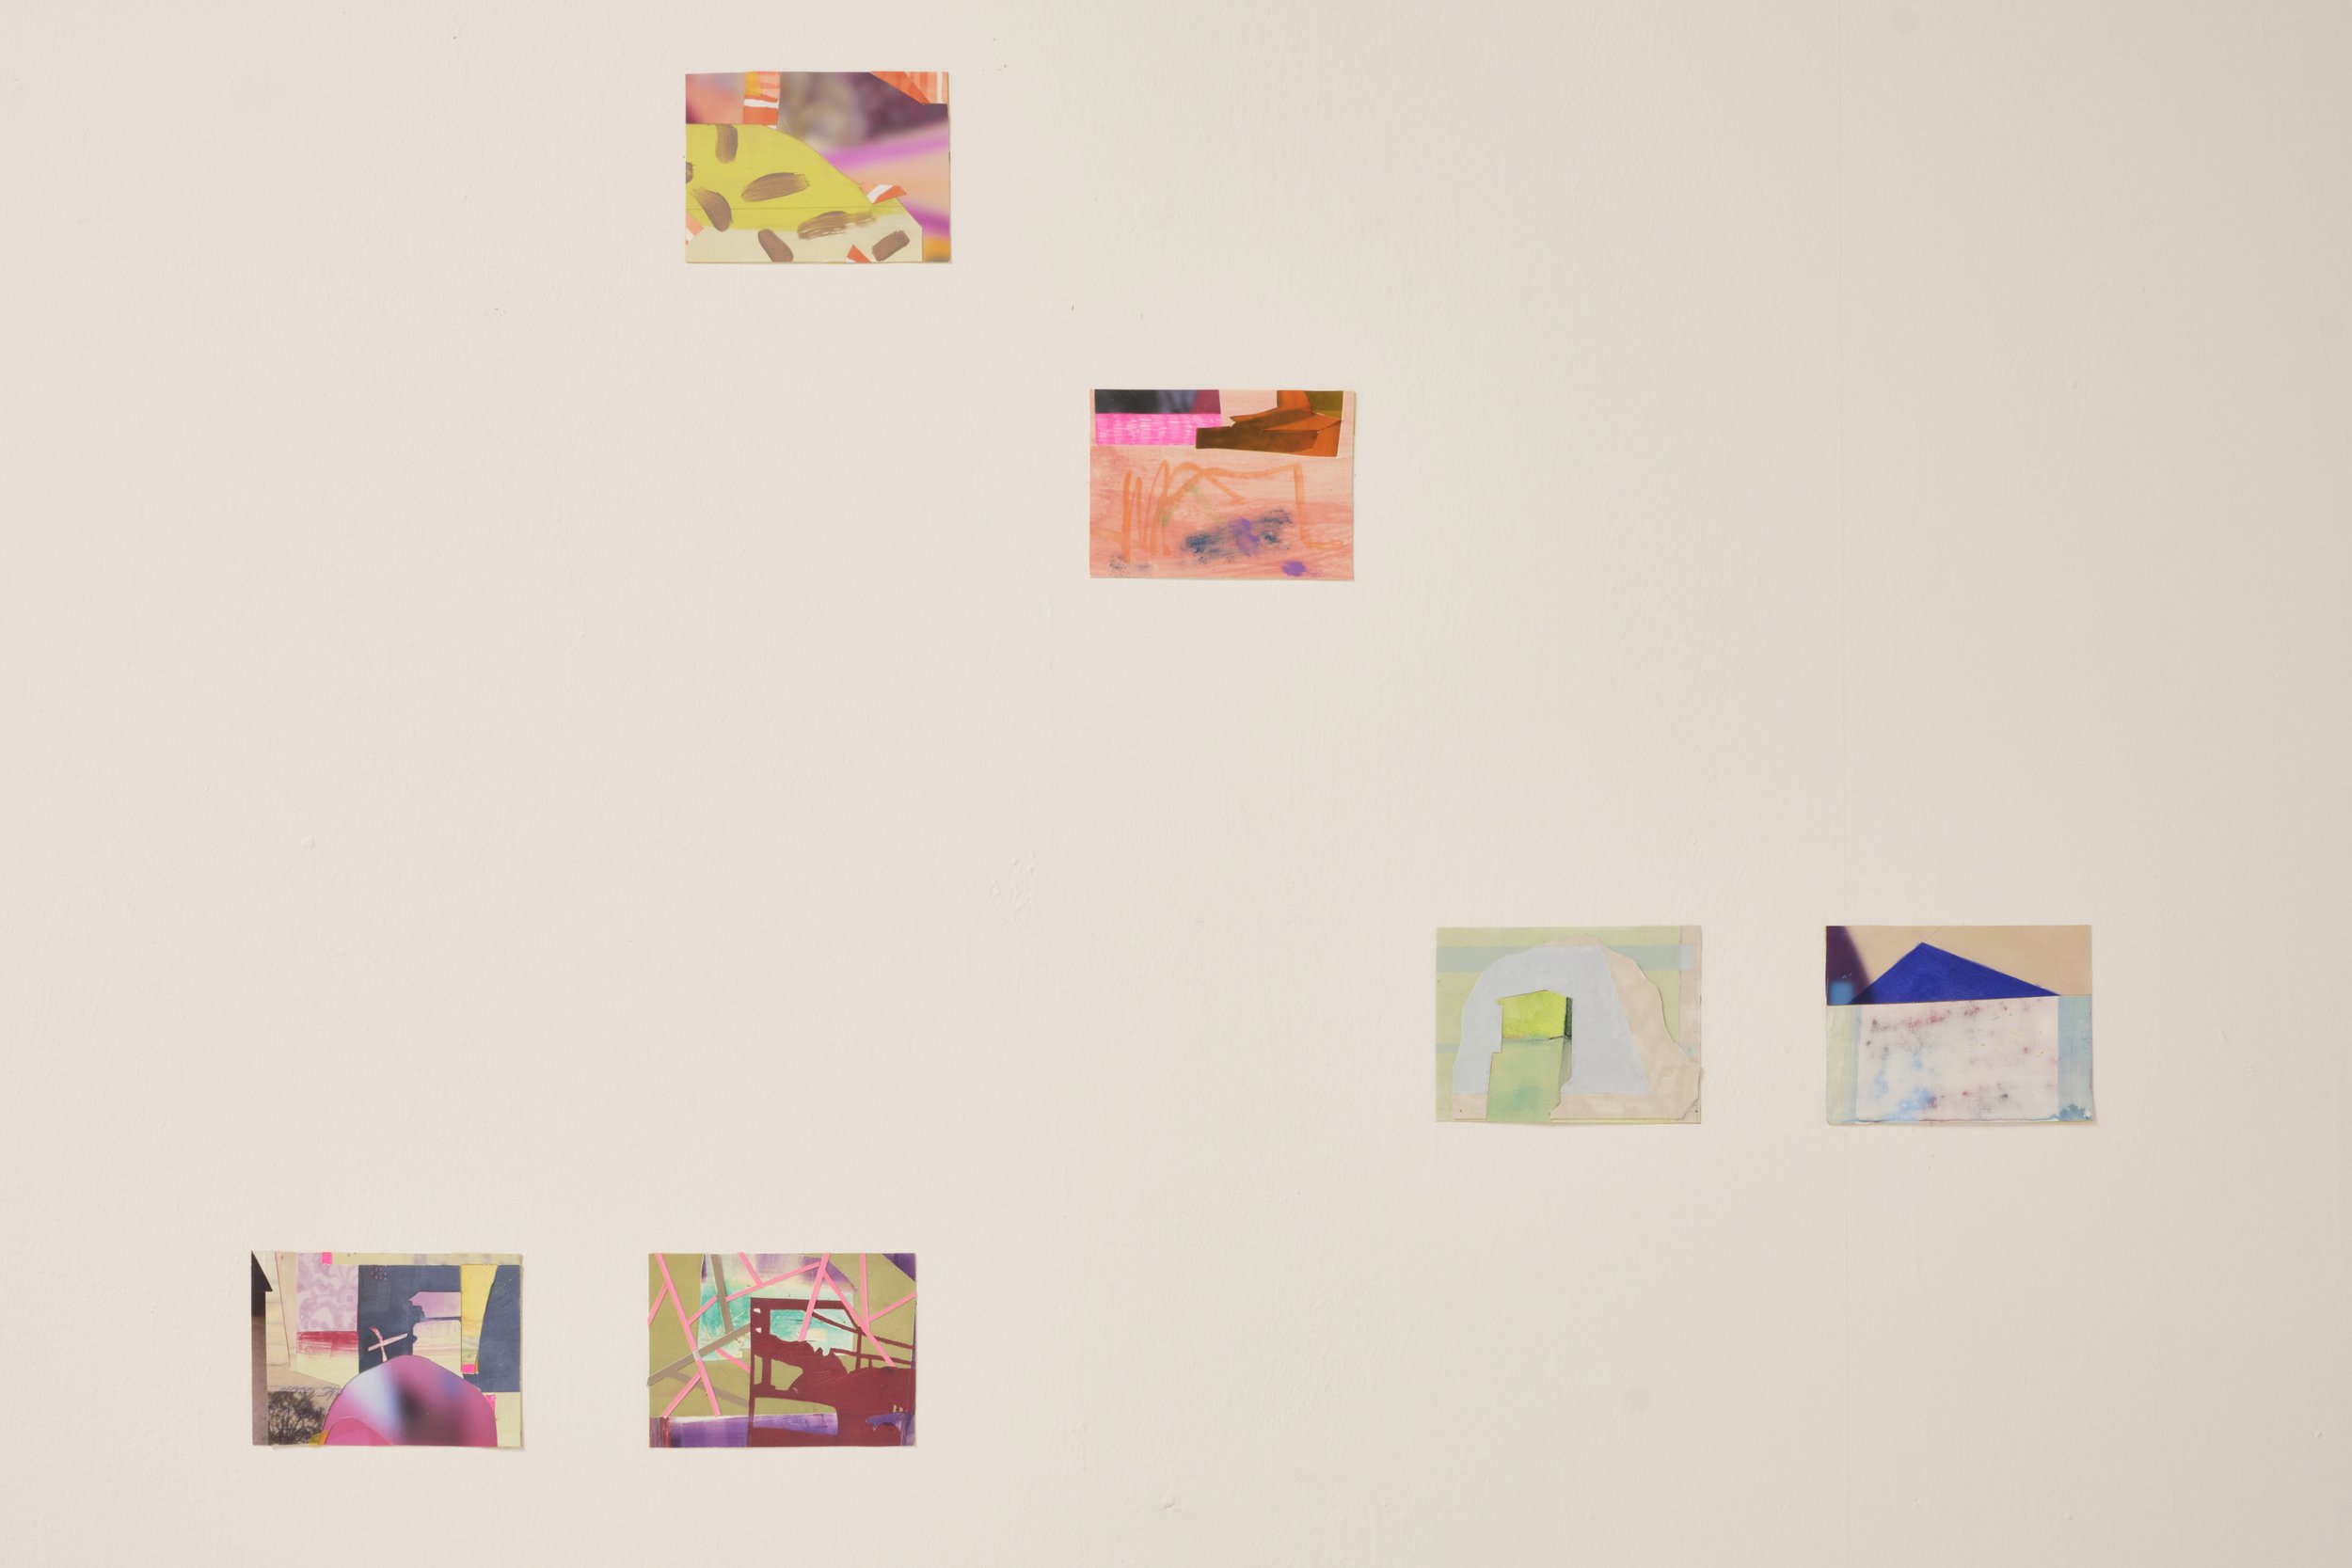   The Act, The Idea, and The Thing,  Collage, screenprint, monoprint, paint, gesso, mixed media, dimensions variable, 2019 – ongoing, (detail) 